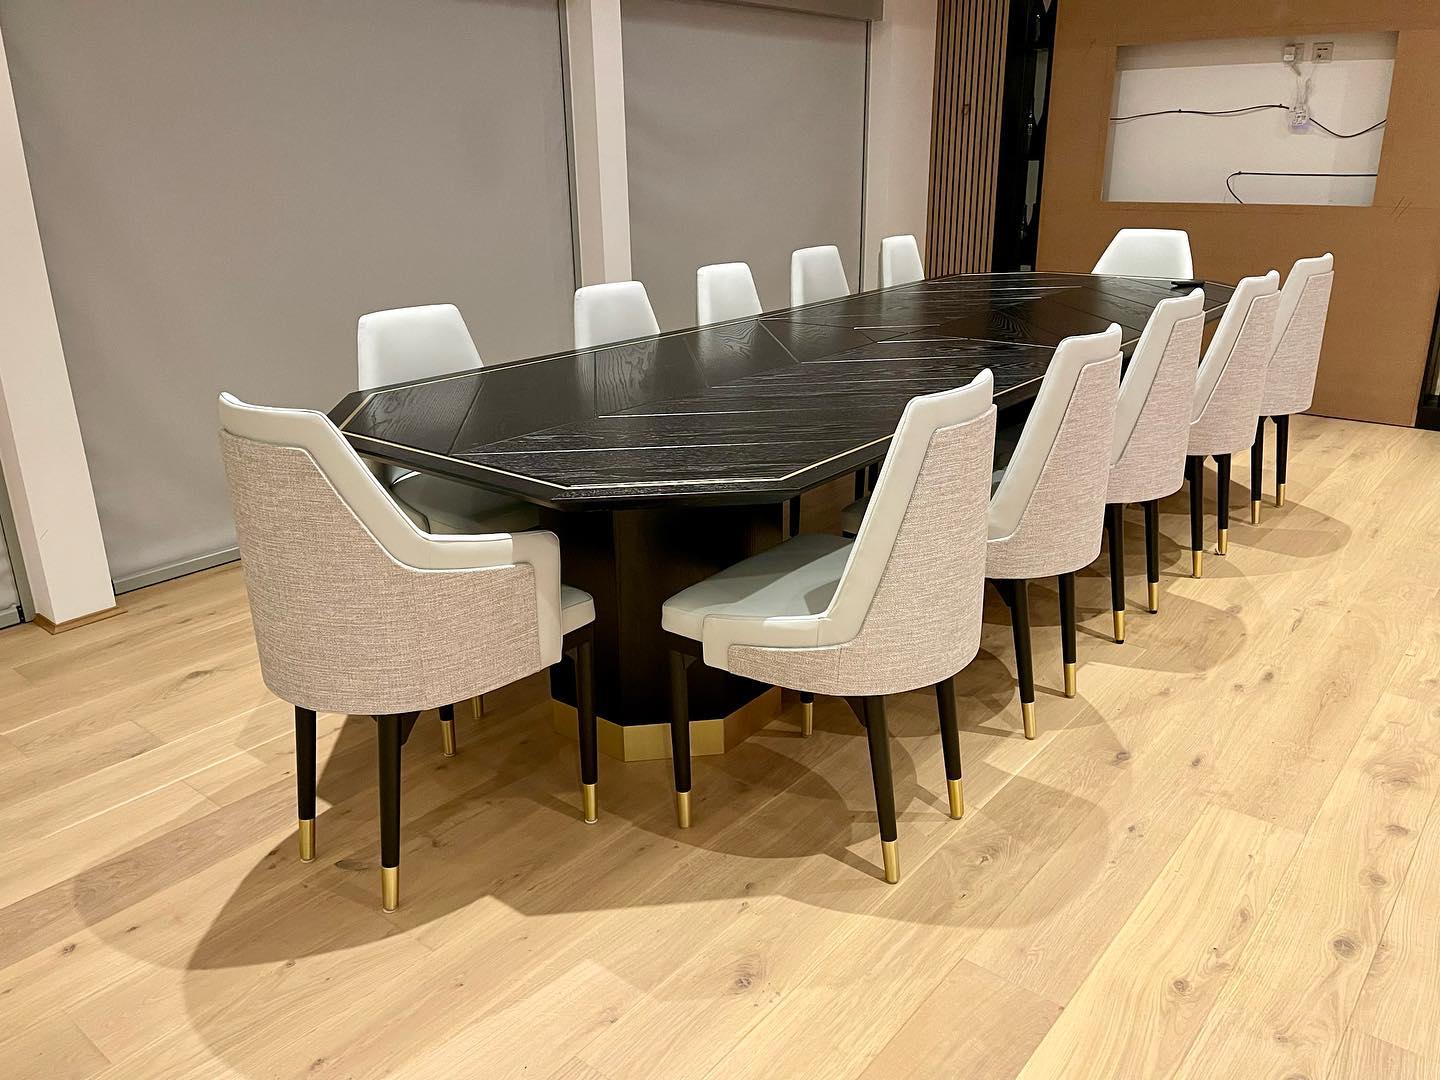 Bespoke Dining Chairs